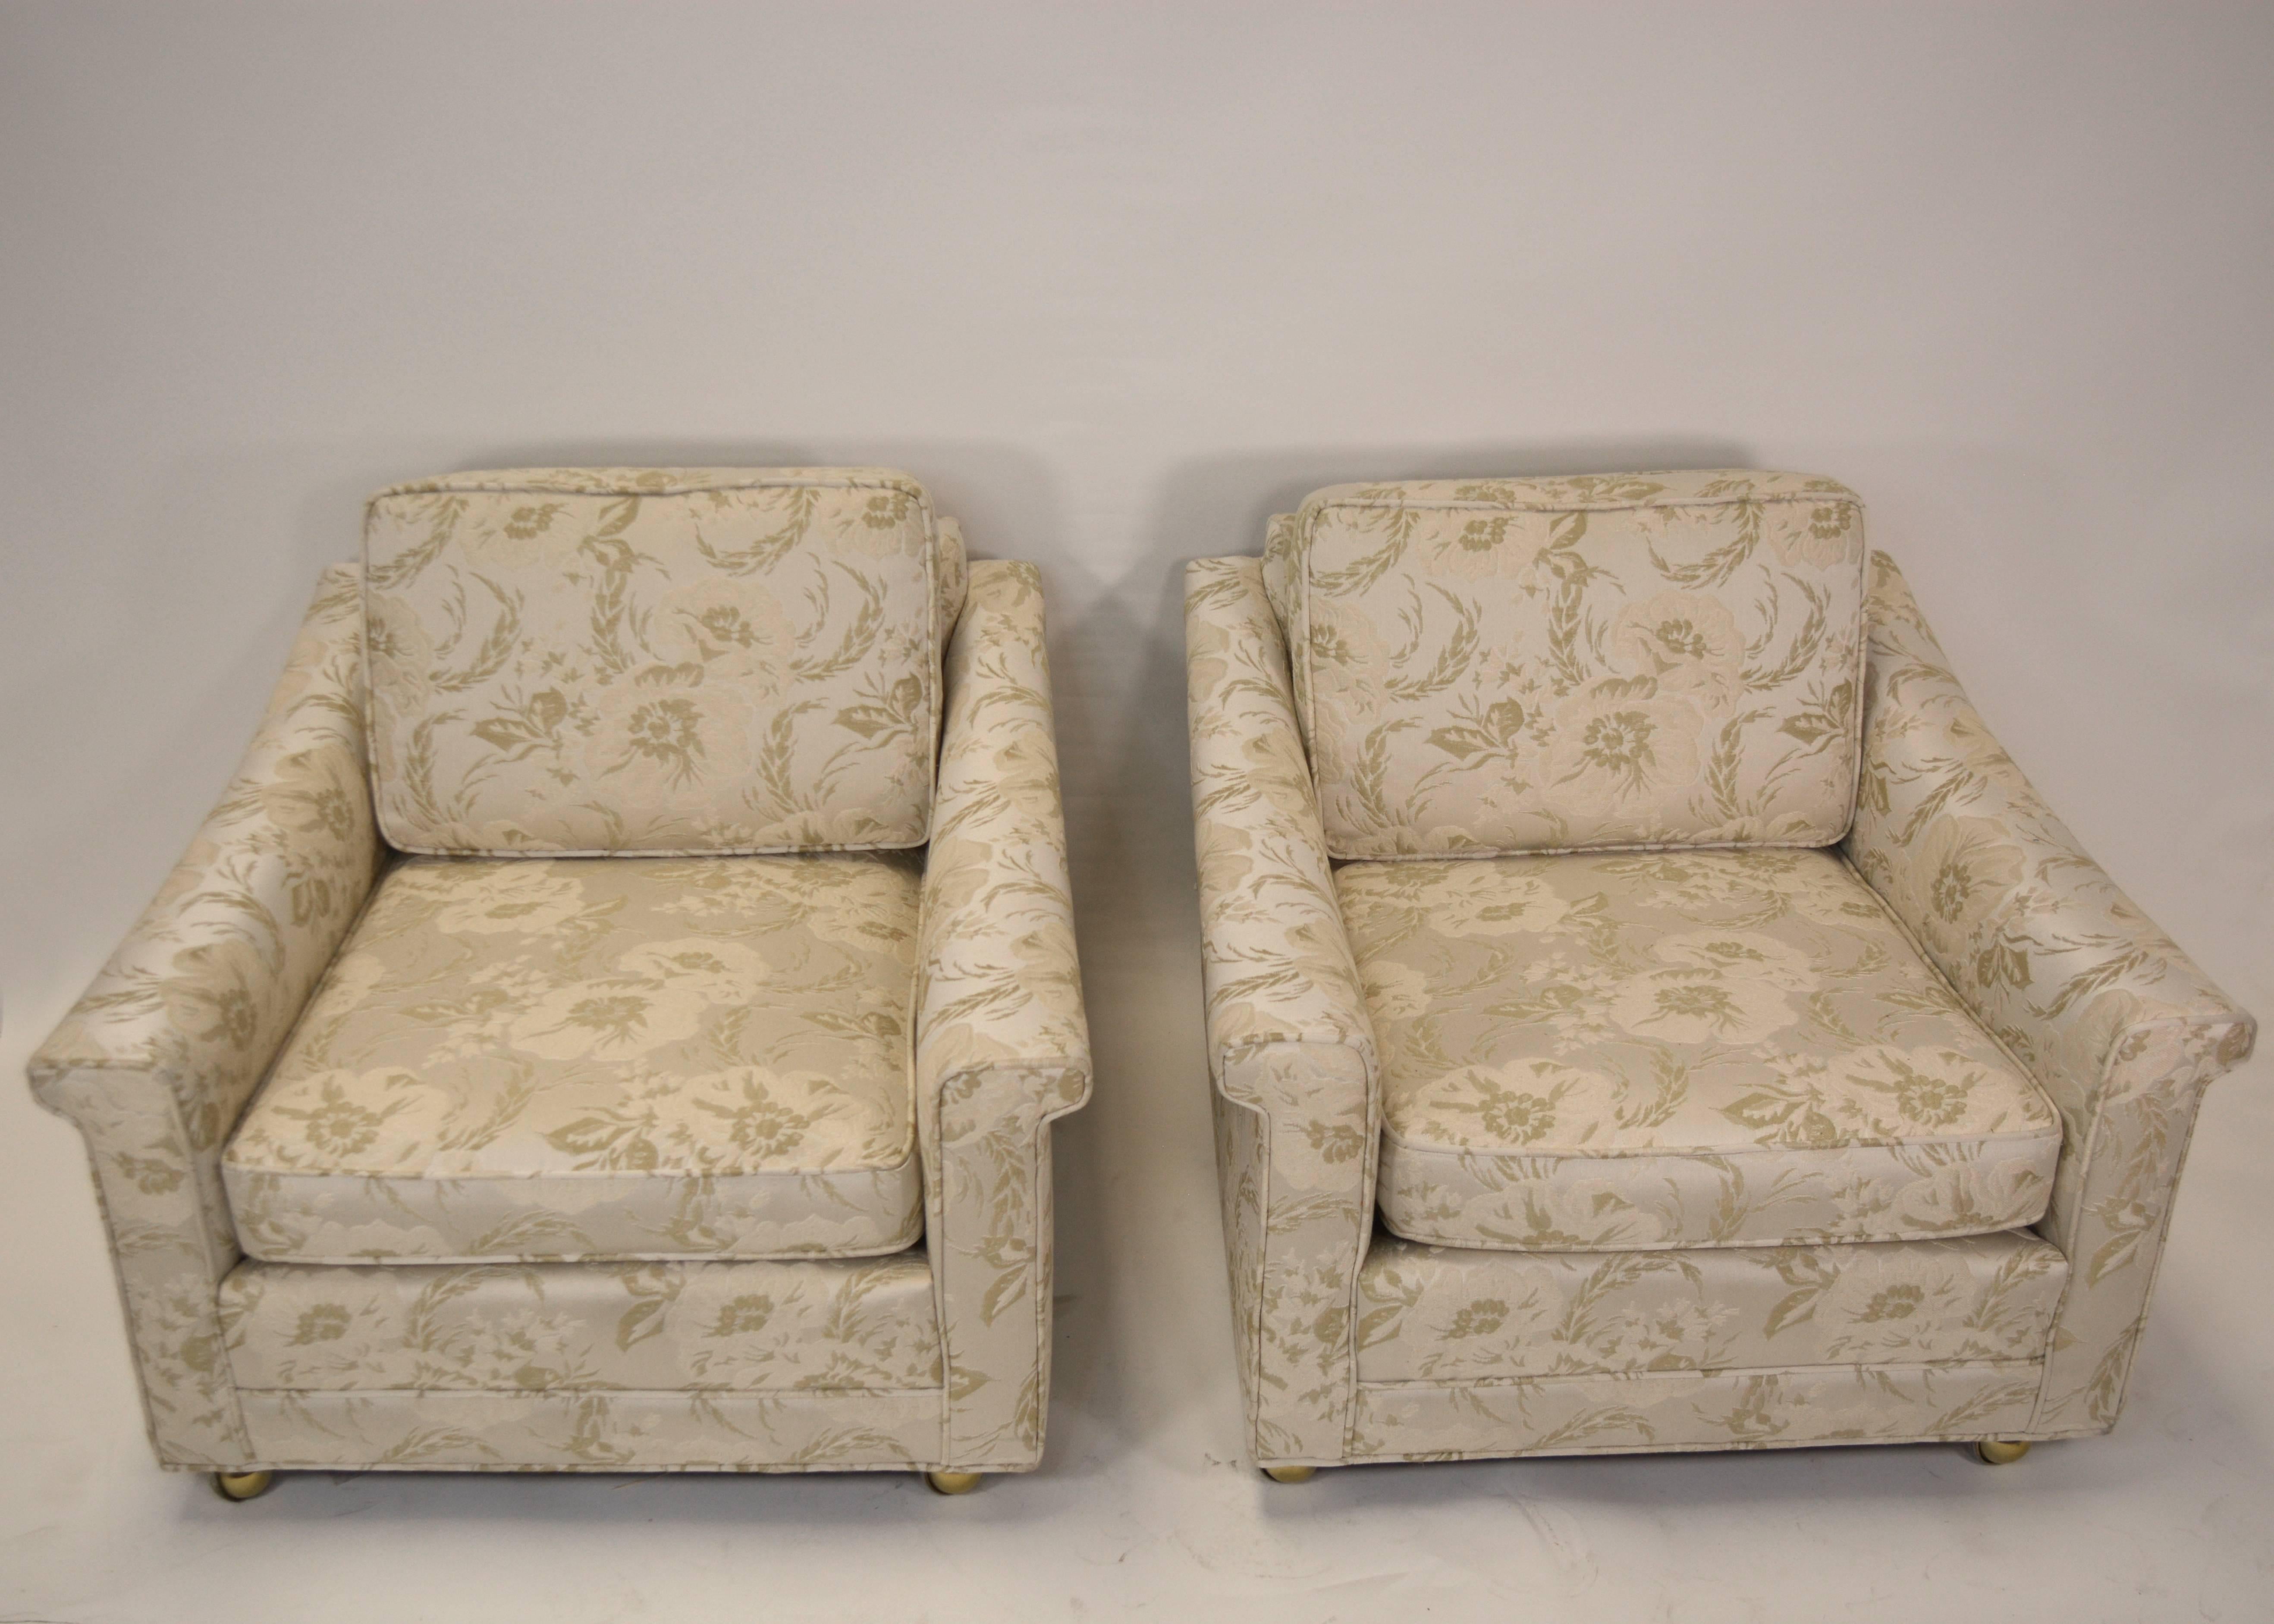 a good pair of mid-century modern club chairs from Red Skelton's Palm Spring Estate. on casters with the original cream floral fabric. Hollywood Regency chic at its best.